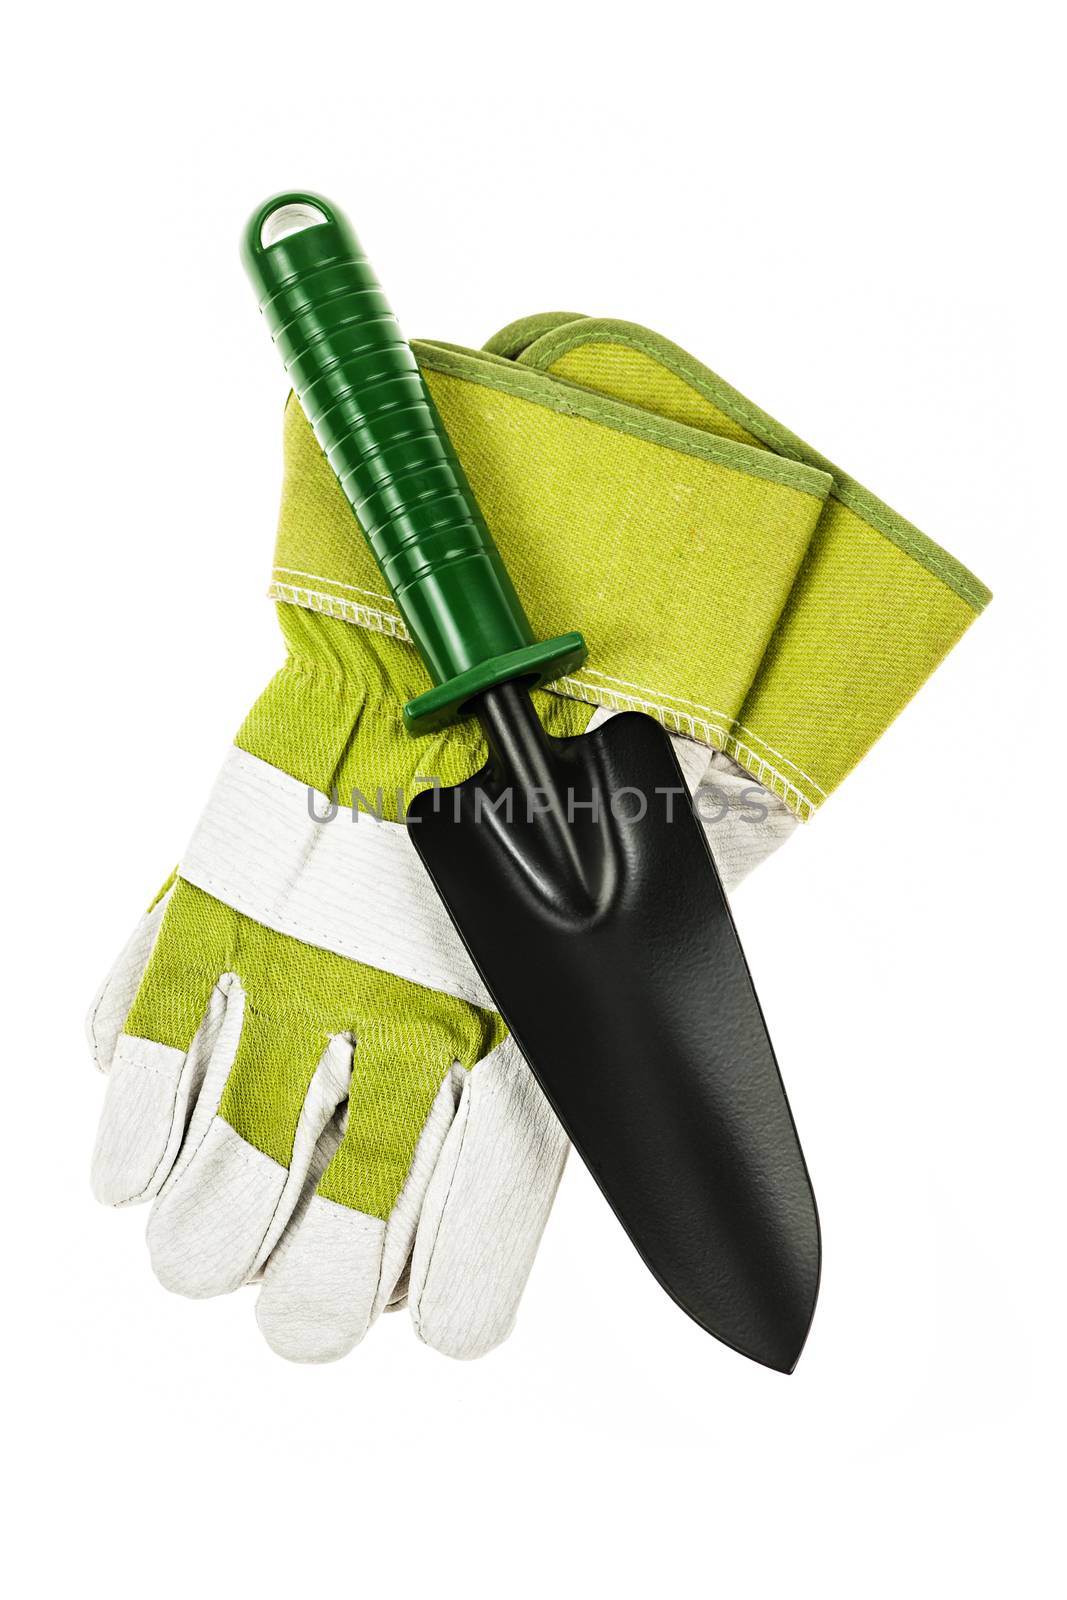 Gardening gloves and trowel isolated on white background